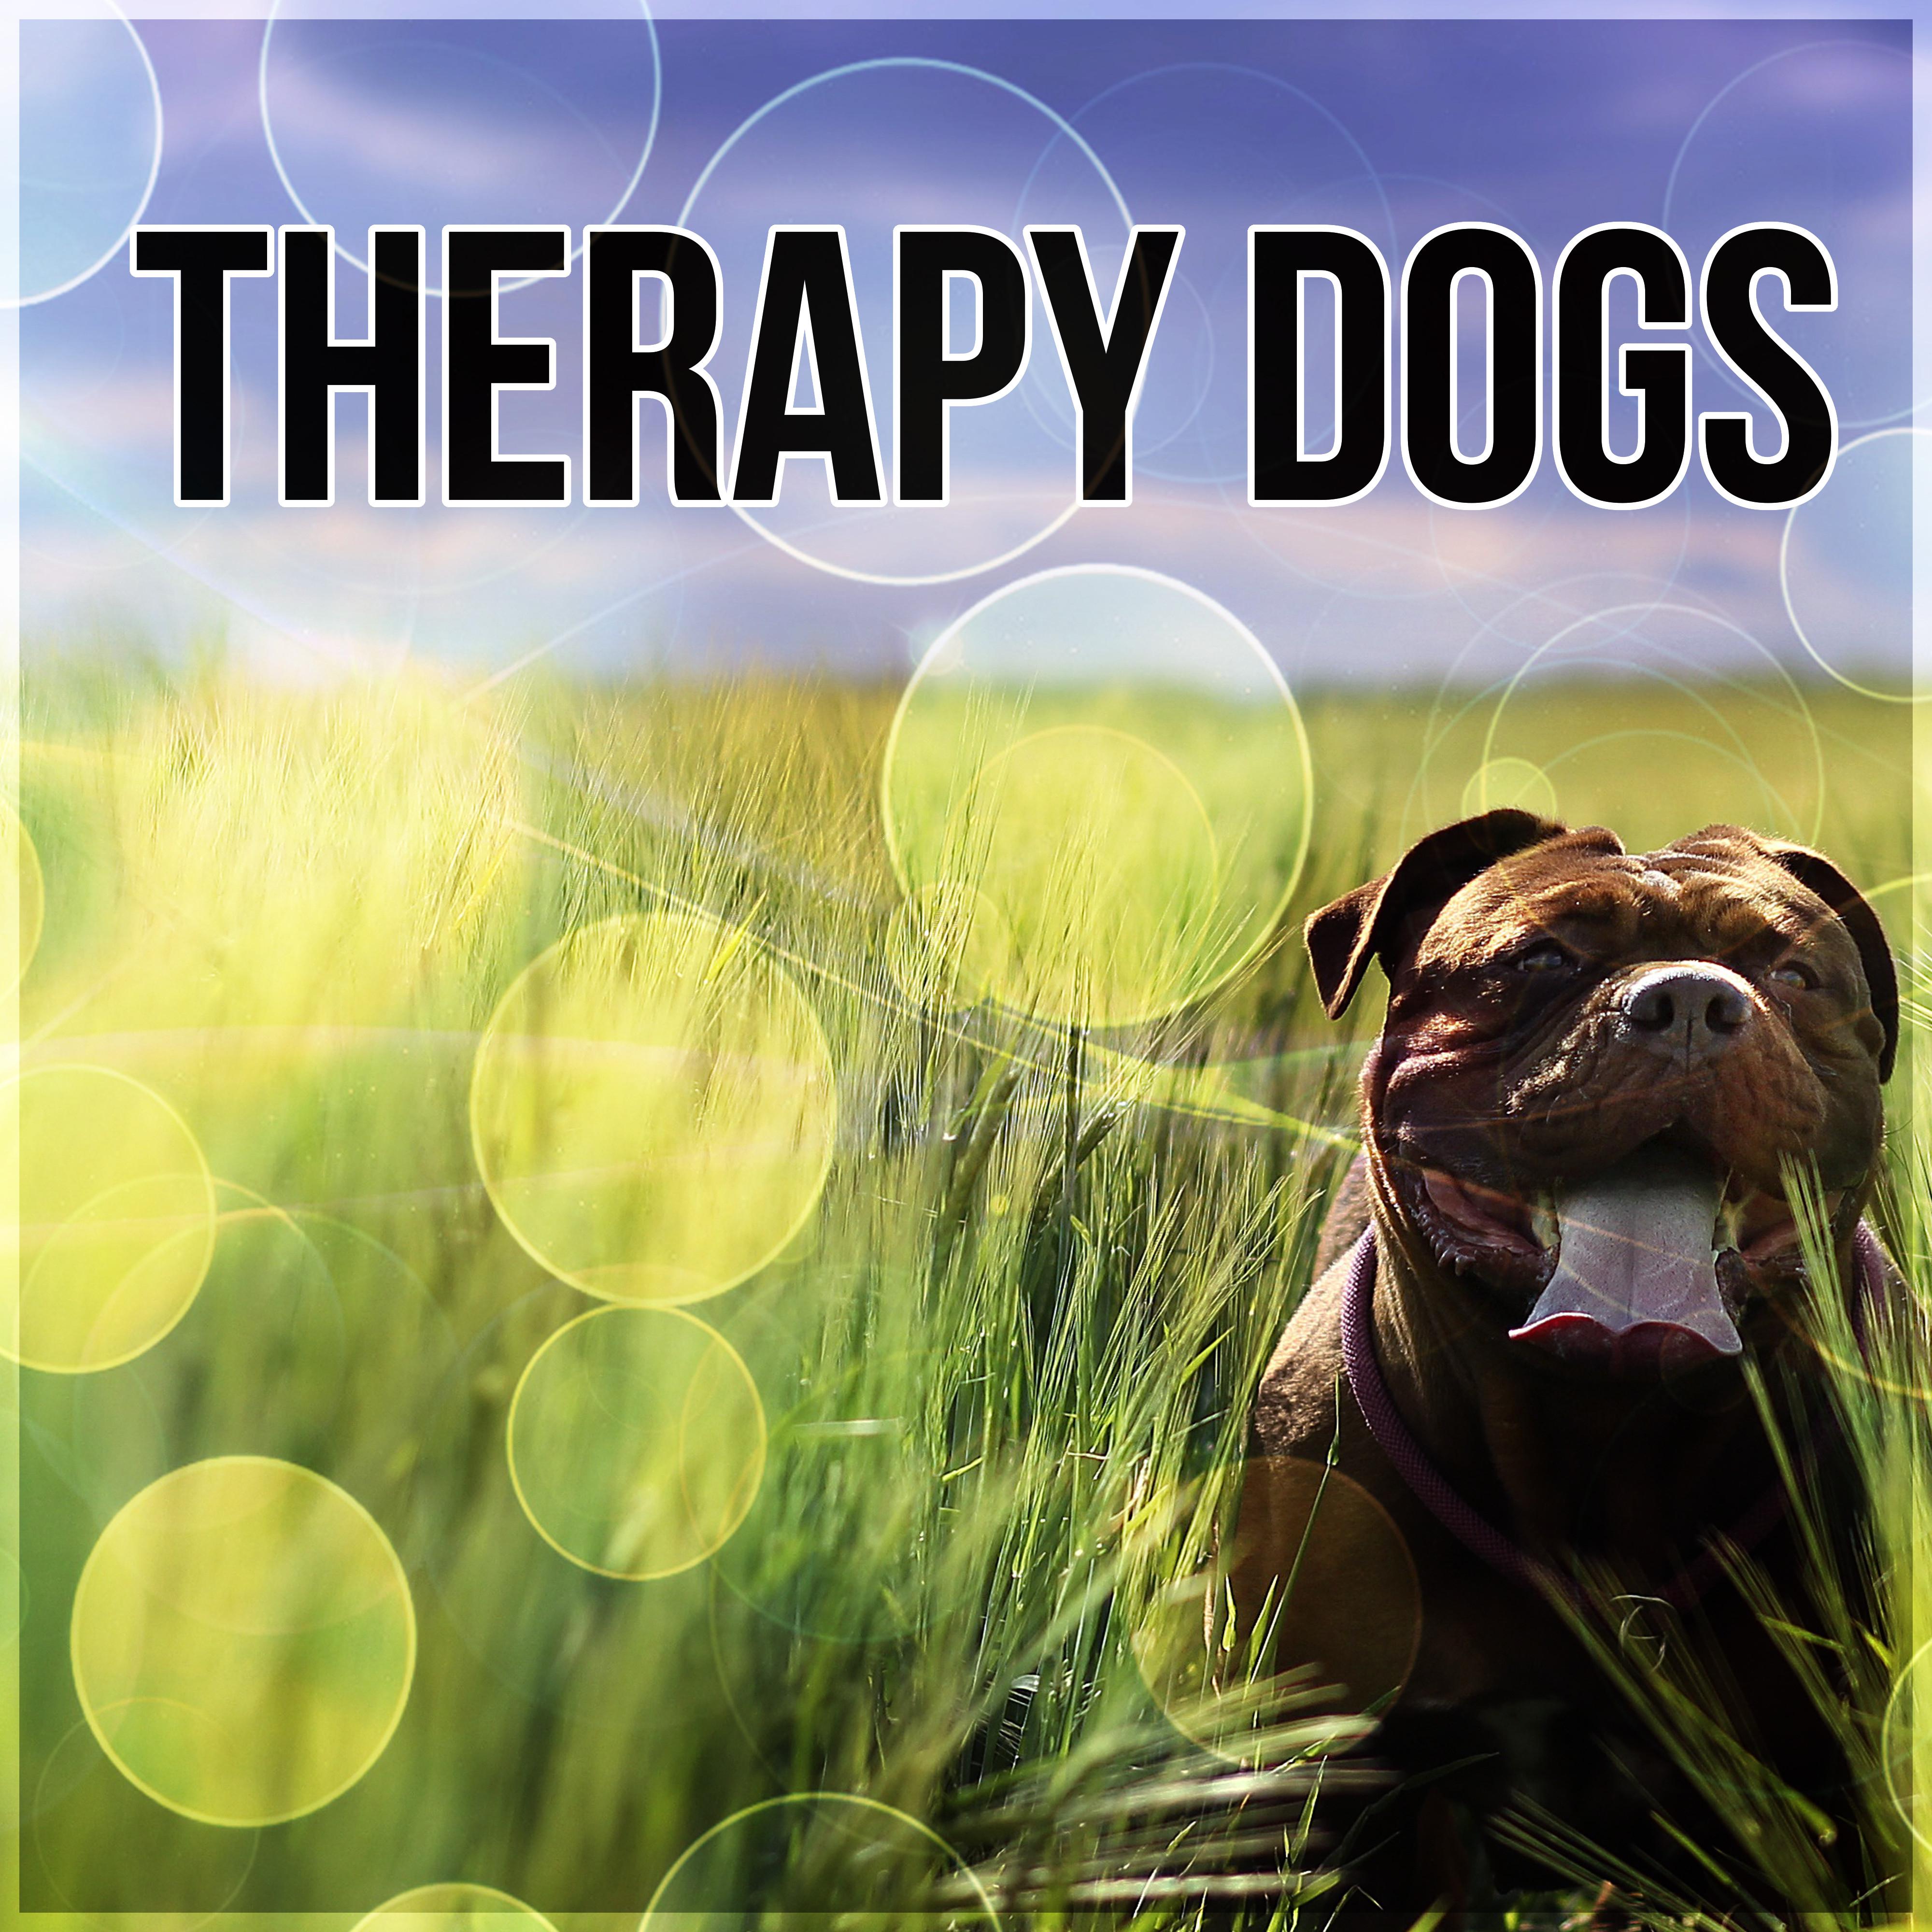 Therapy Dogs  Calm Down Your Animal Companion, Music Therapy for Dogs, Sleep Aids, Pet Relaxation, Stress Relief